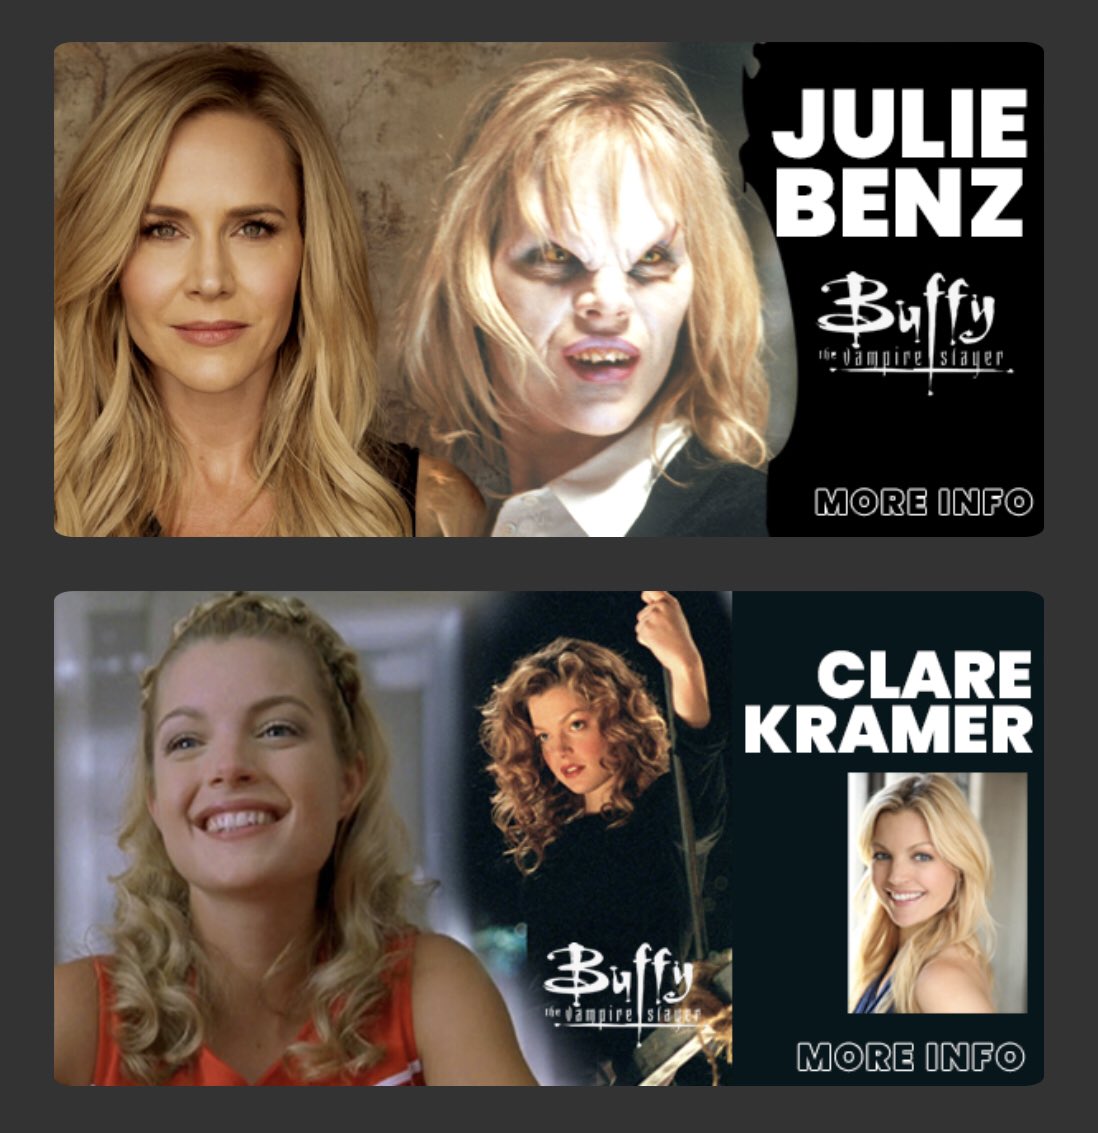 Guys! This Friday 2pm PST @juliebenz and I will be hanging out and doing a live signing on our IGs! Head over to Streamily.com/ClareKramer and Streamily.com/JulieBenz to place your merch order…. We can’t wait to chat with YOU! #BuffyTheVampireSlayer #BFF @StreamilyLive